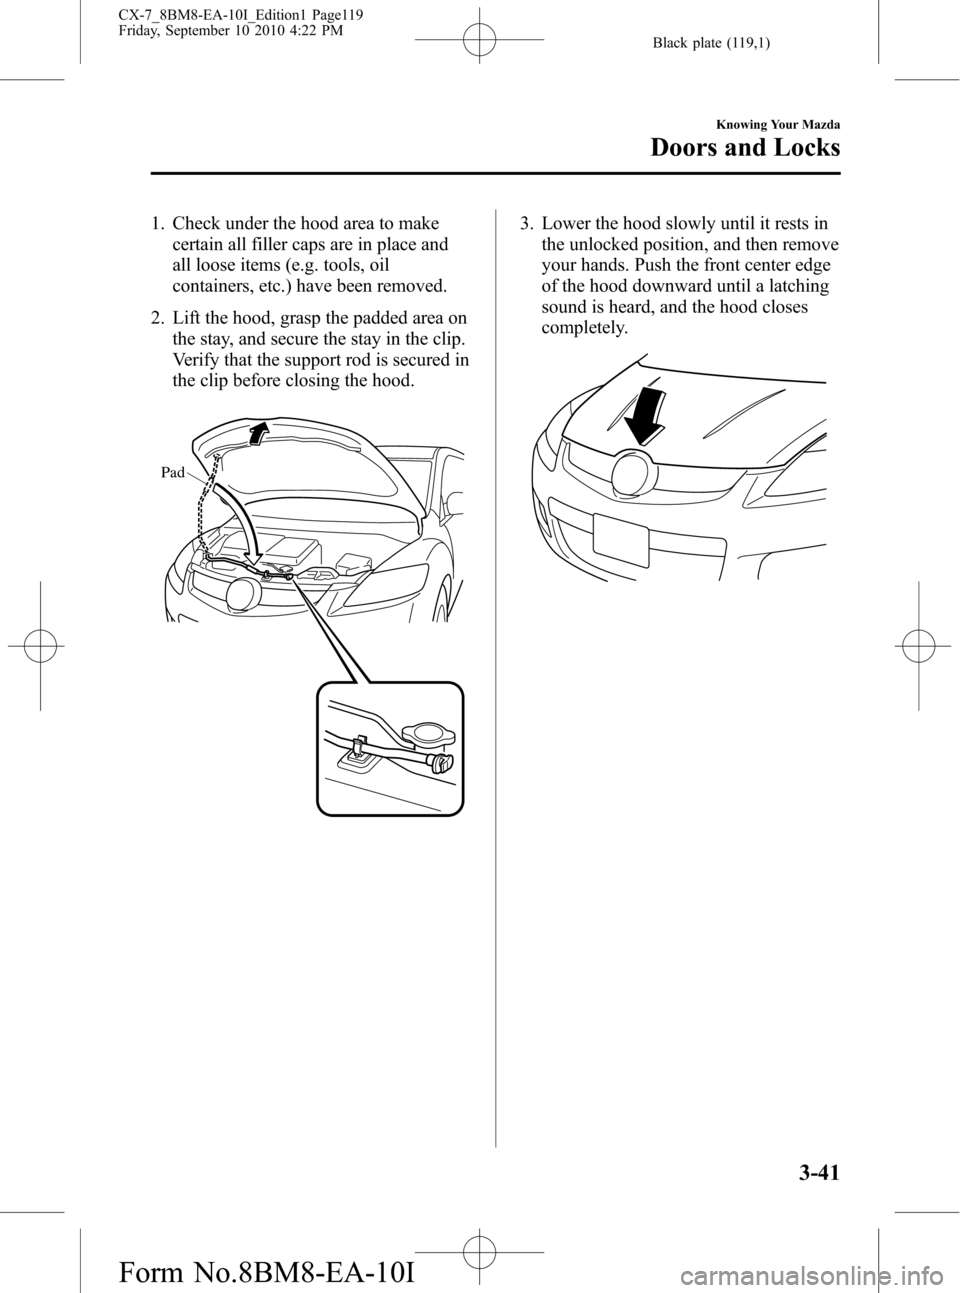 MAZDA MODEL CX-7 2011  Owners Manual (in English) Black plate (119,1)
1. Check under the hood area to make
certain all filler caps are in place and
all loose items (e.g. tools, oil
containers, etc.) have been removed.
2. Lift the hood, grasp the padd